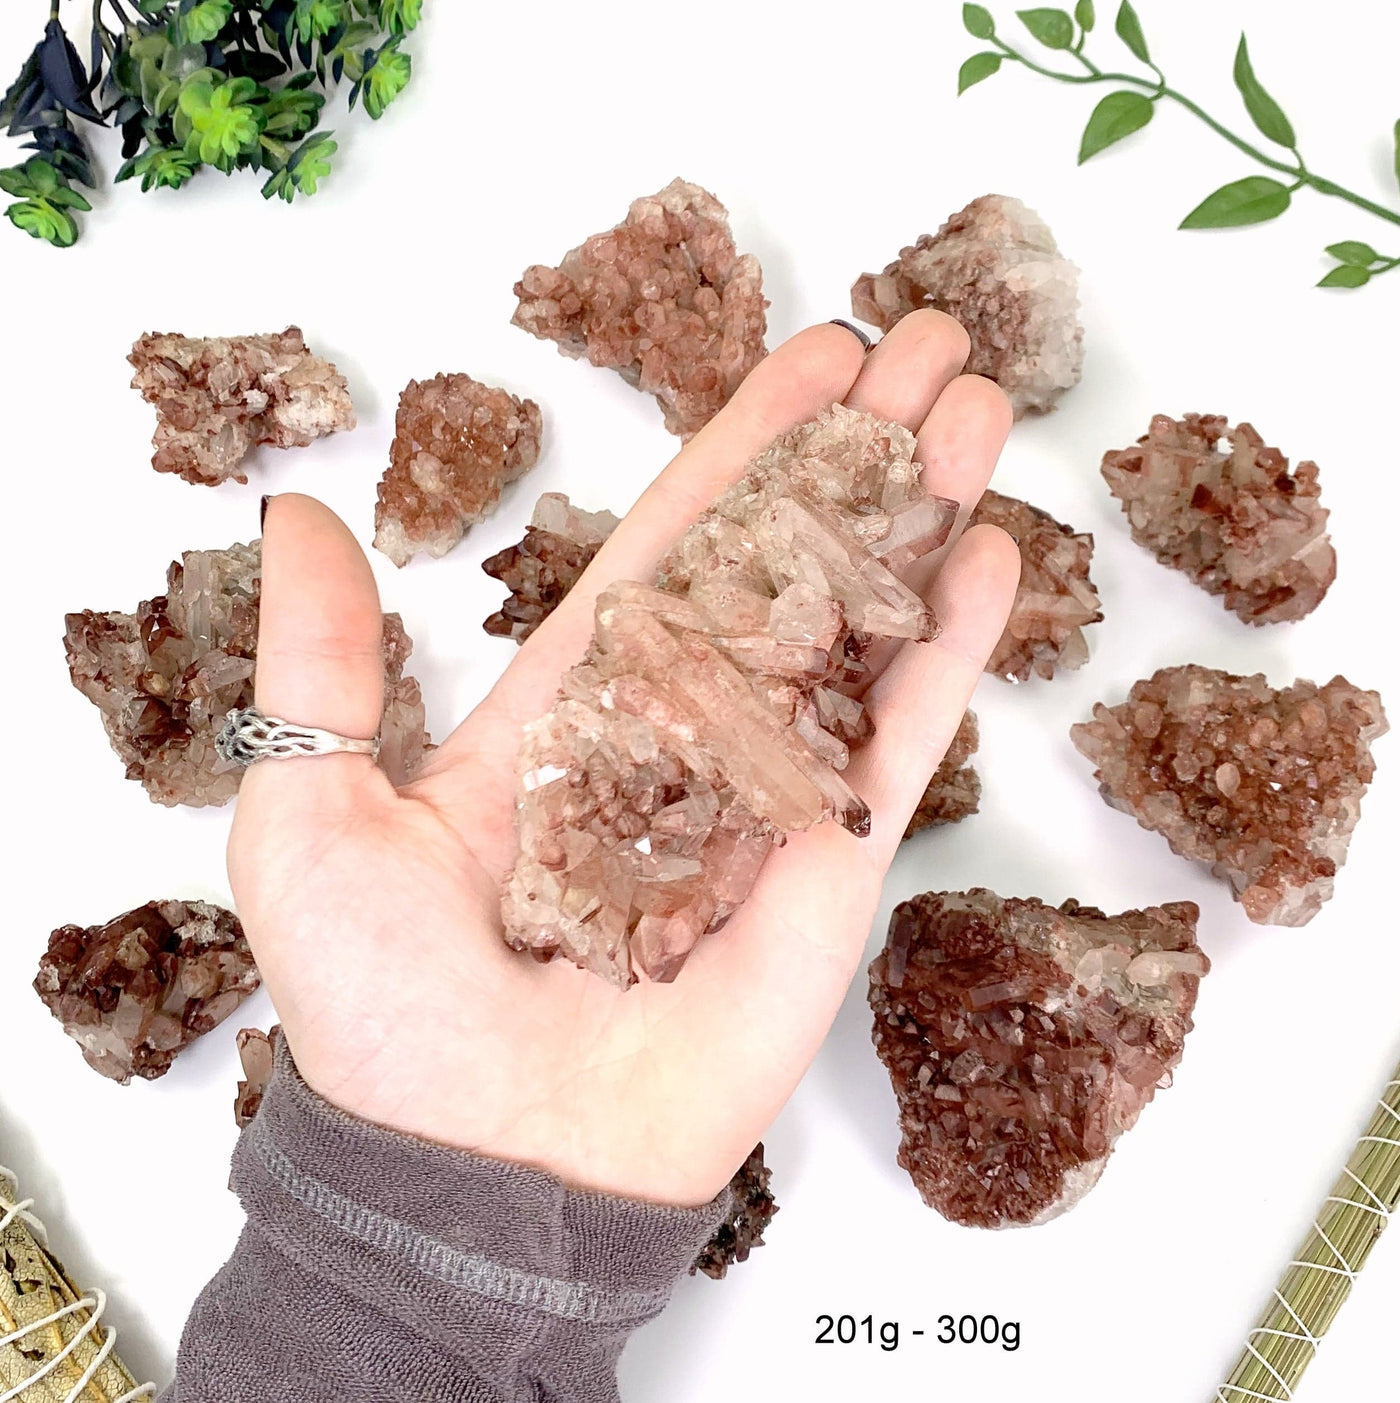 201 gram to 300 gram lithium quartz clusters 1 piece fits in the palm of a man's hand